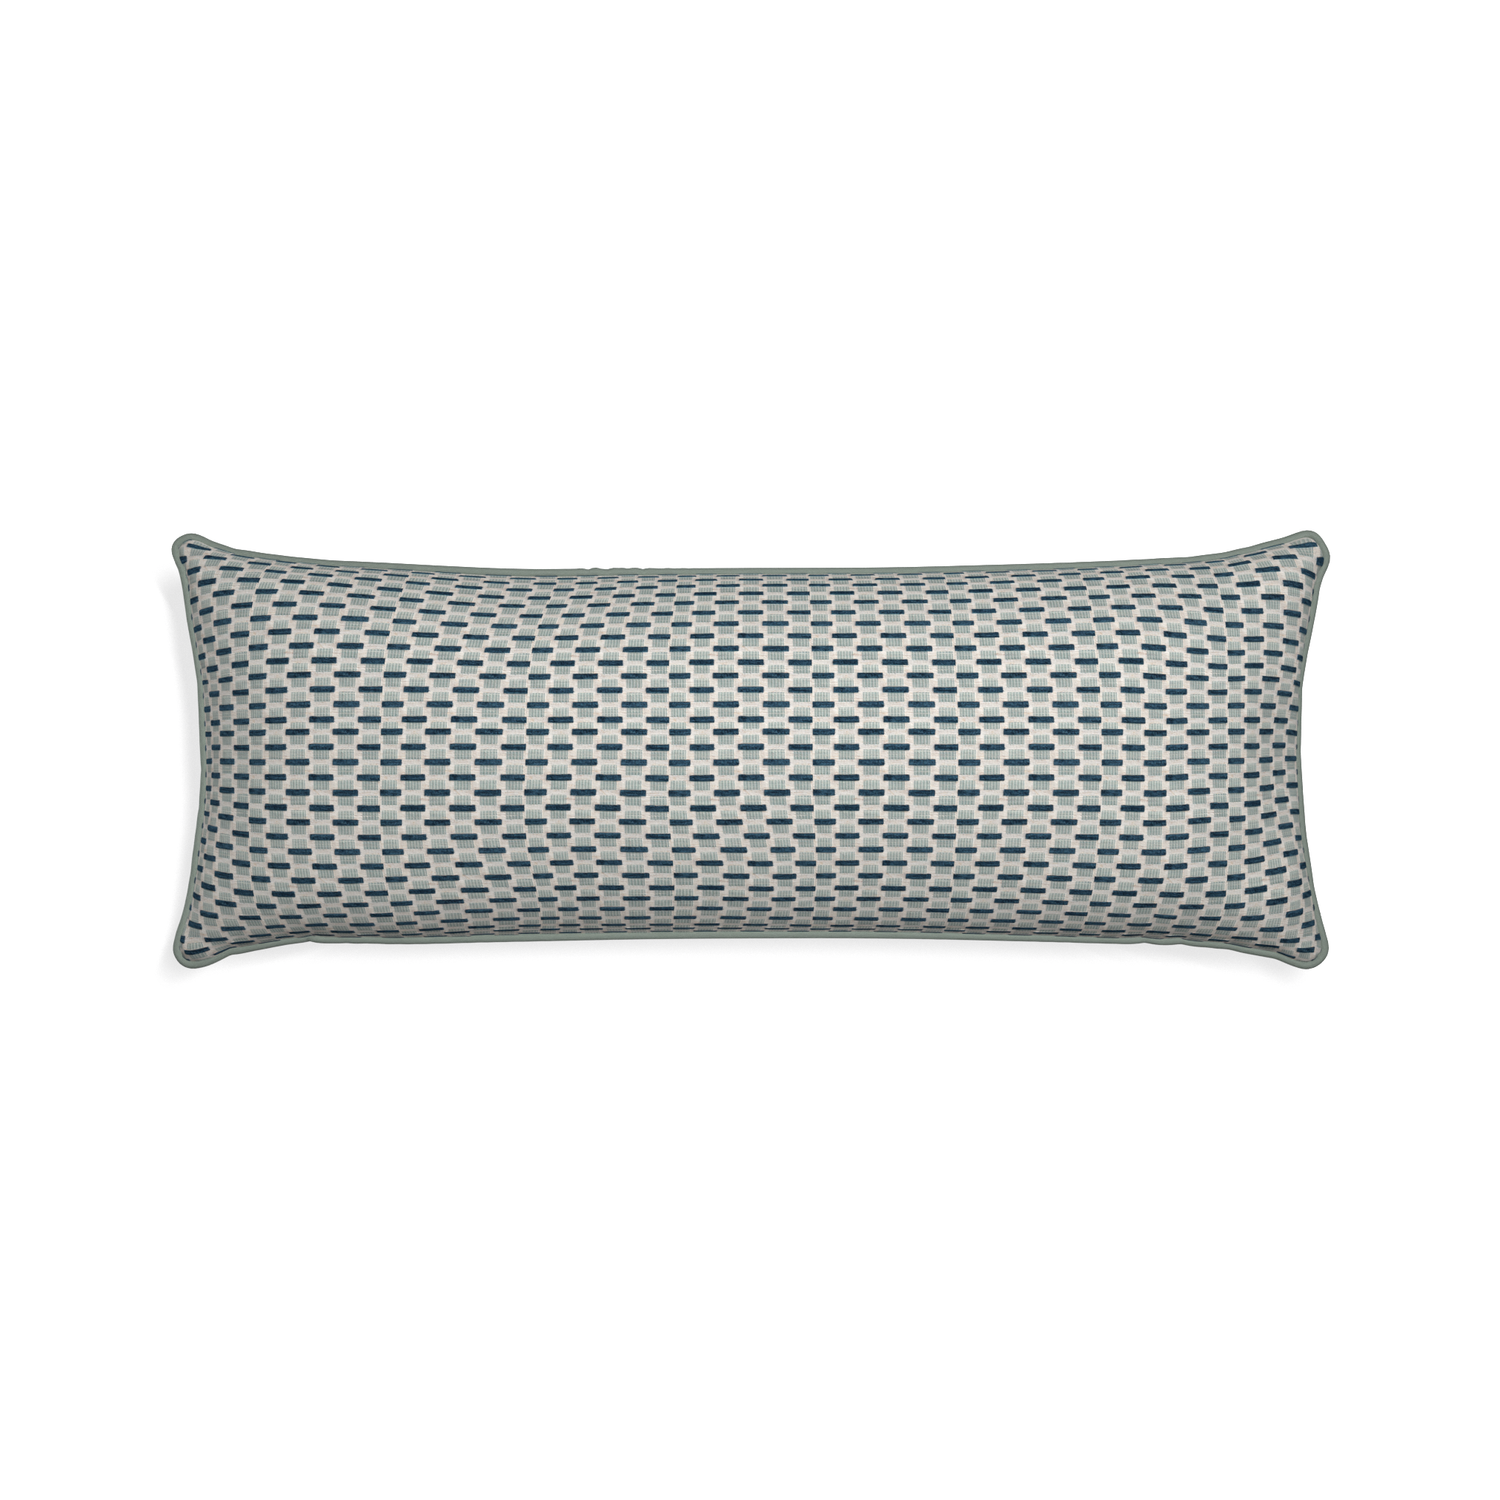 Xl-lumbar willow amalfi custom blue geometric chenillepillow with sage piping on white background